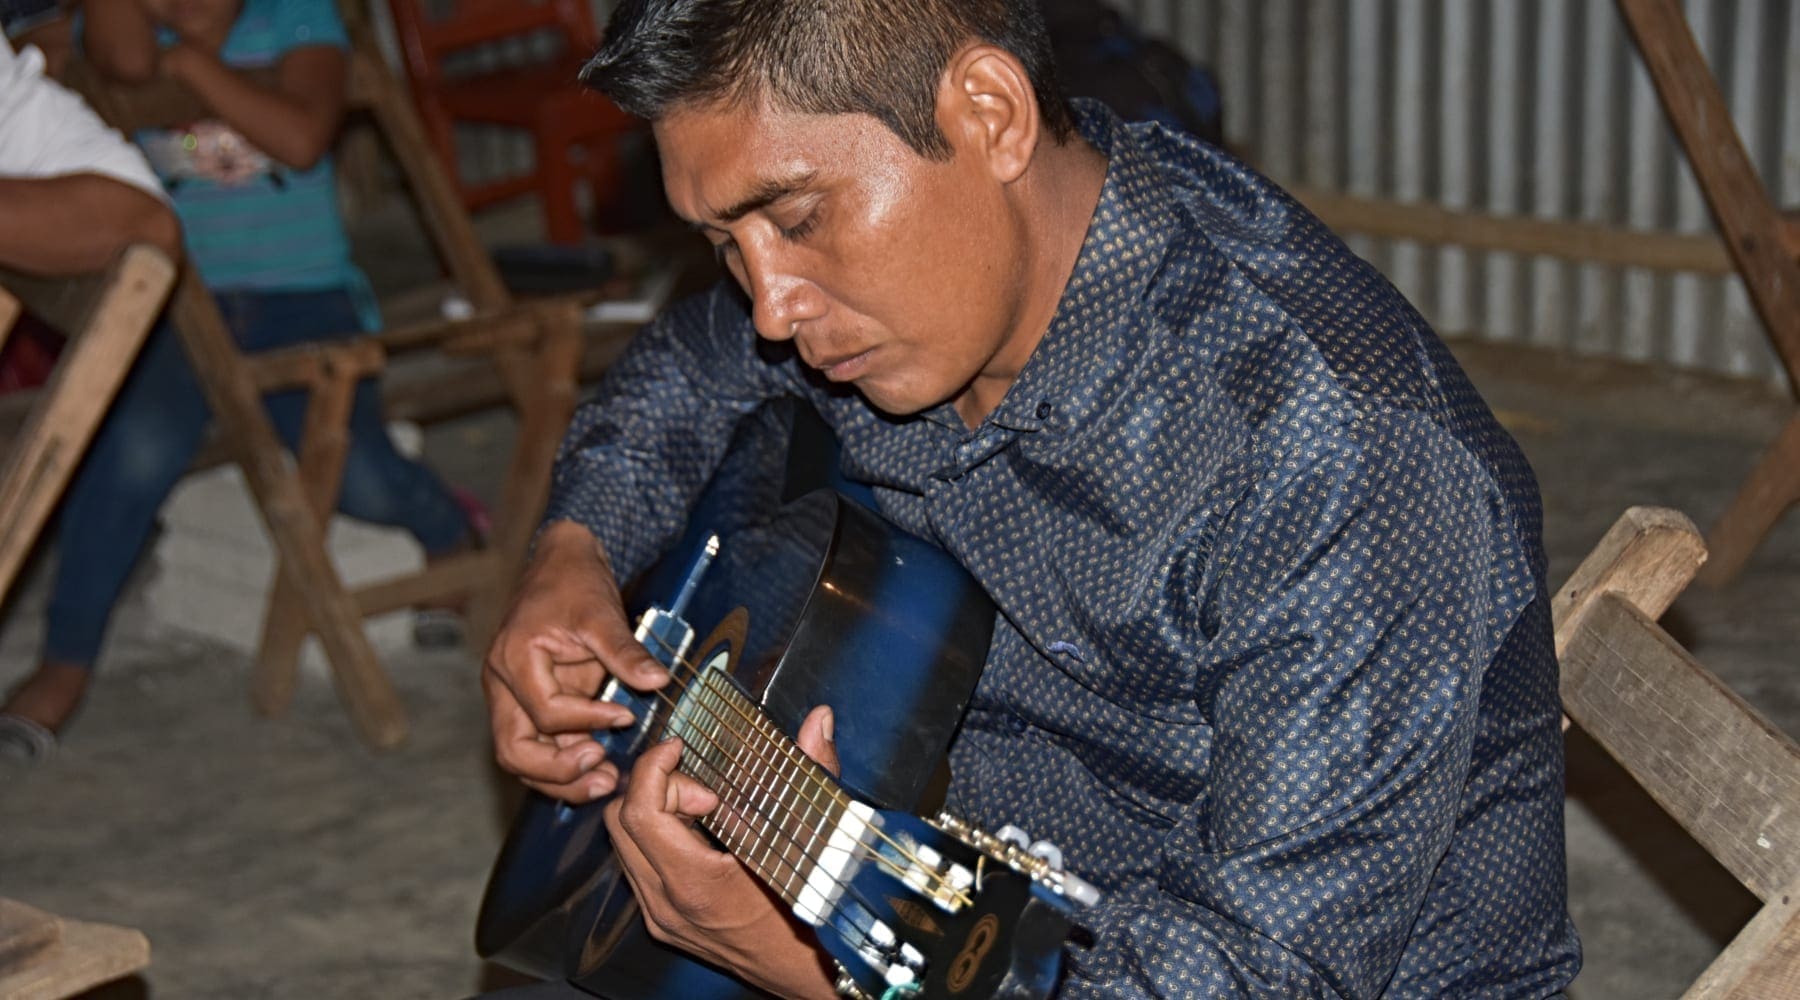 A local pastor in Chiapas playing a blue guitar